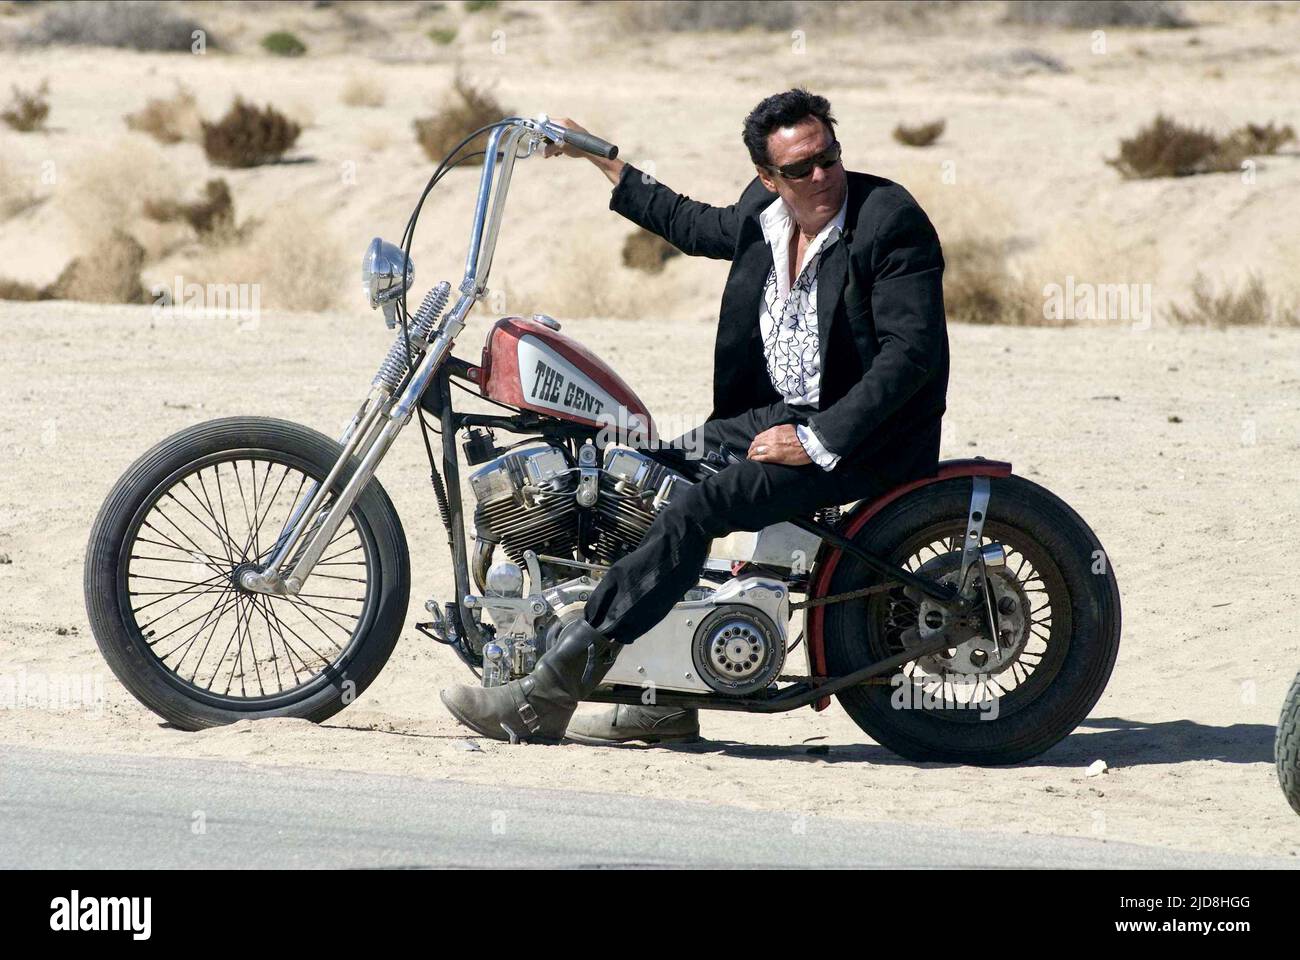 MICHAEL MADSEN, HELL RIDE, 2008, Banque D'Images